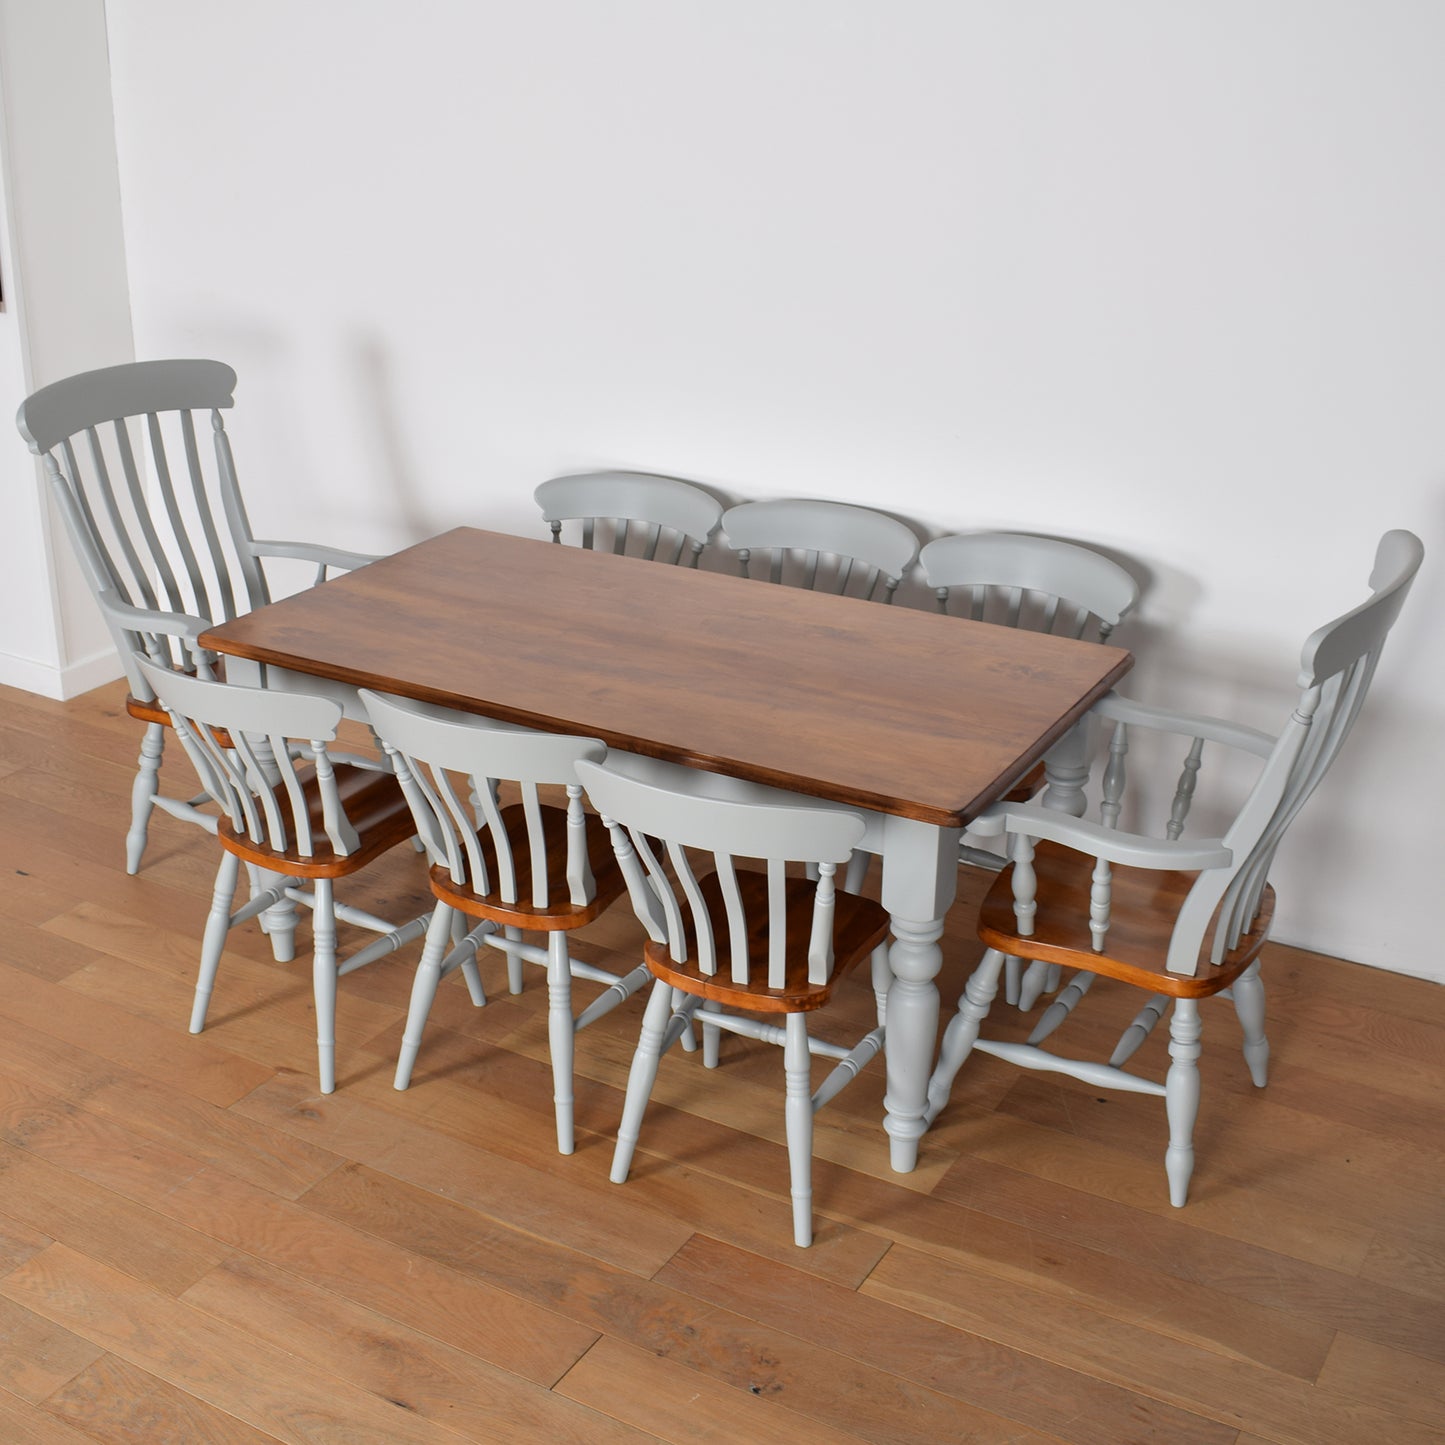 Painted Dining Table with Eight Chairs